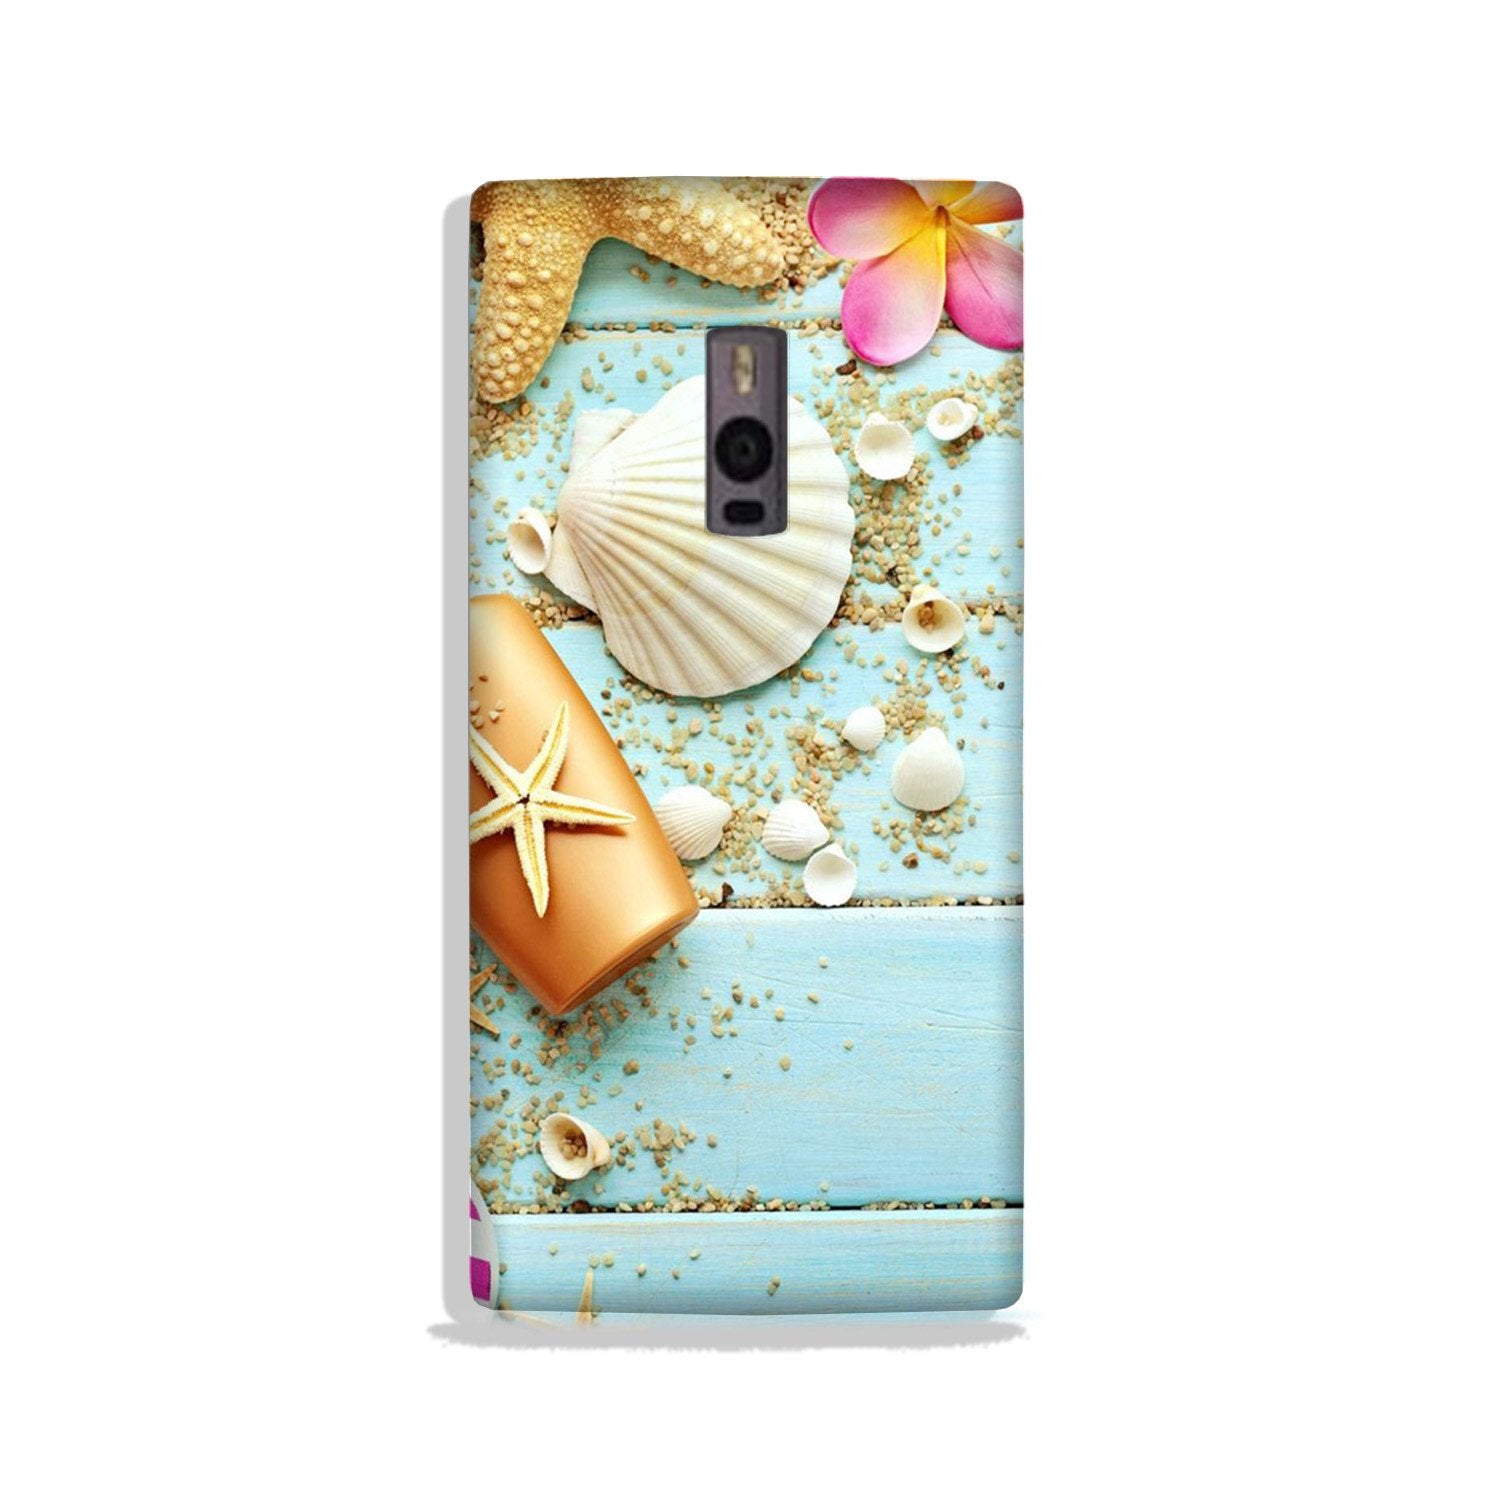 Sea Shells Case for OnePlus 2